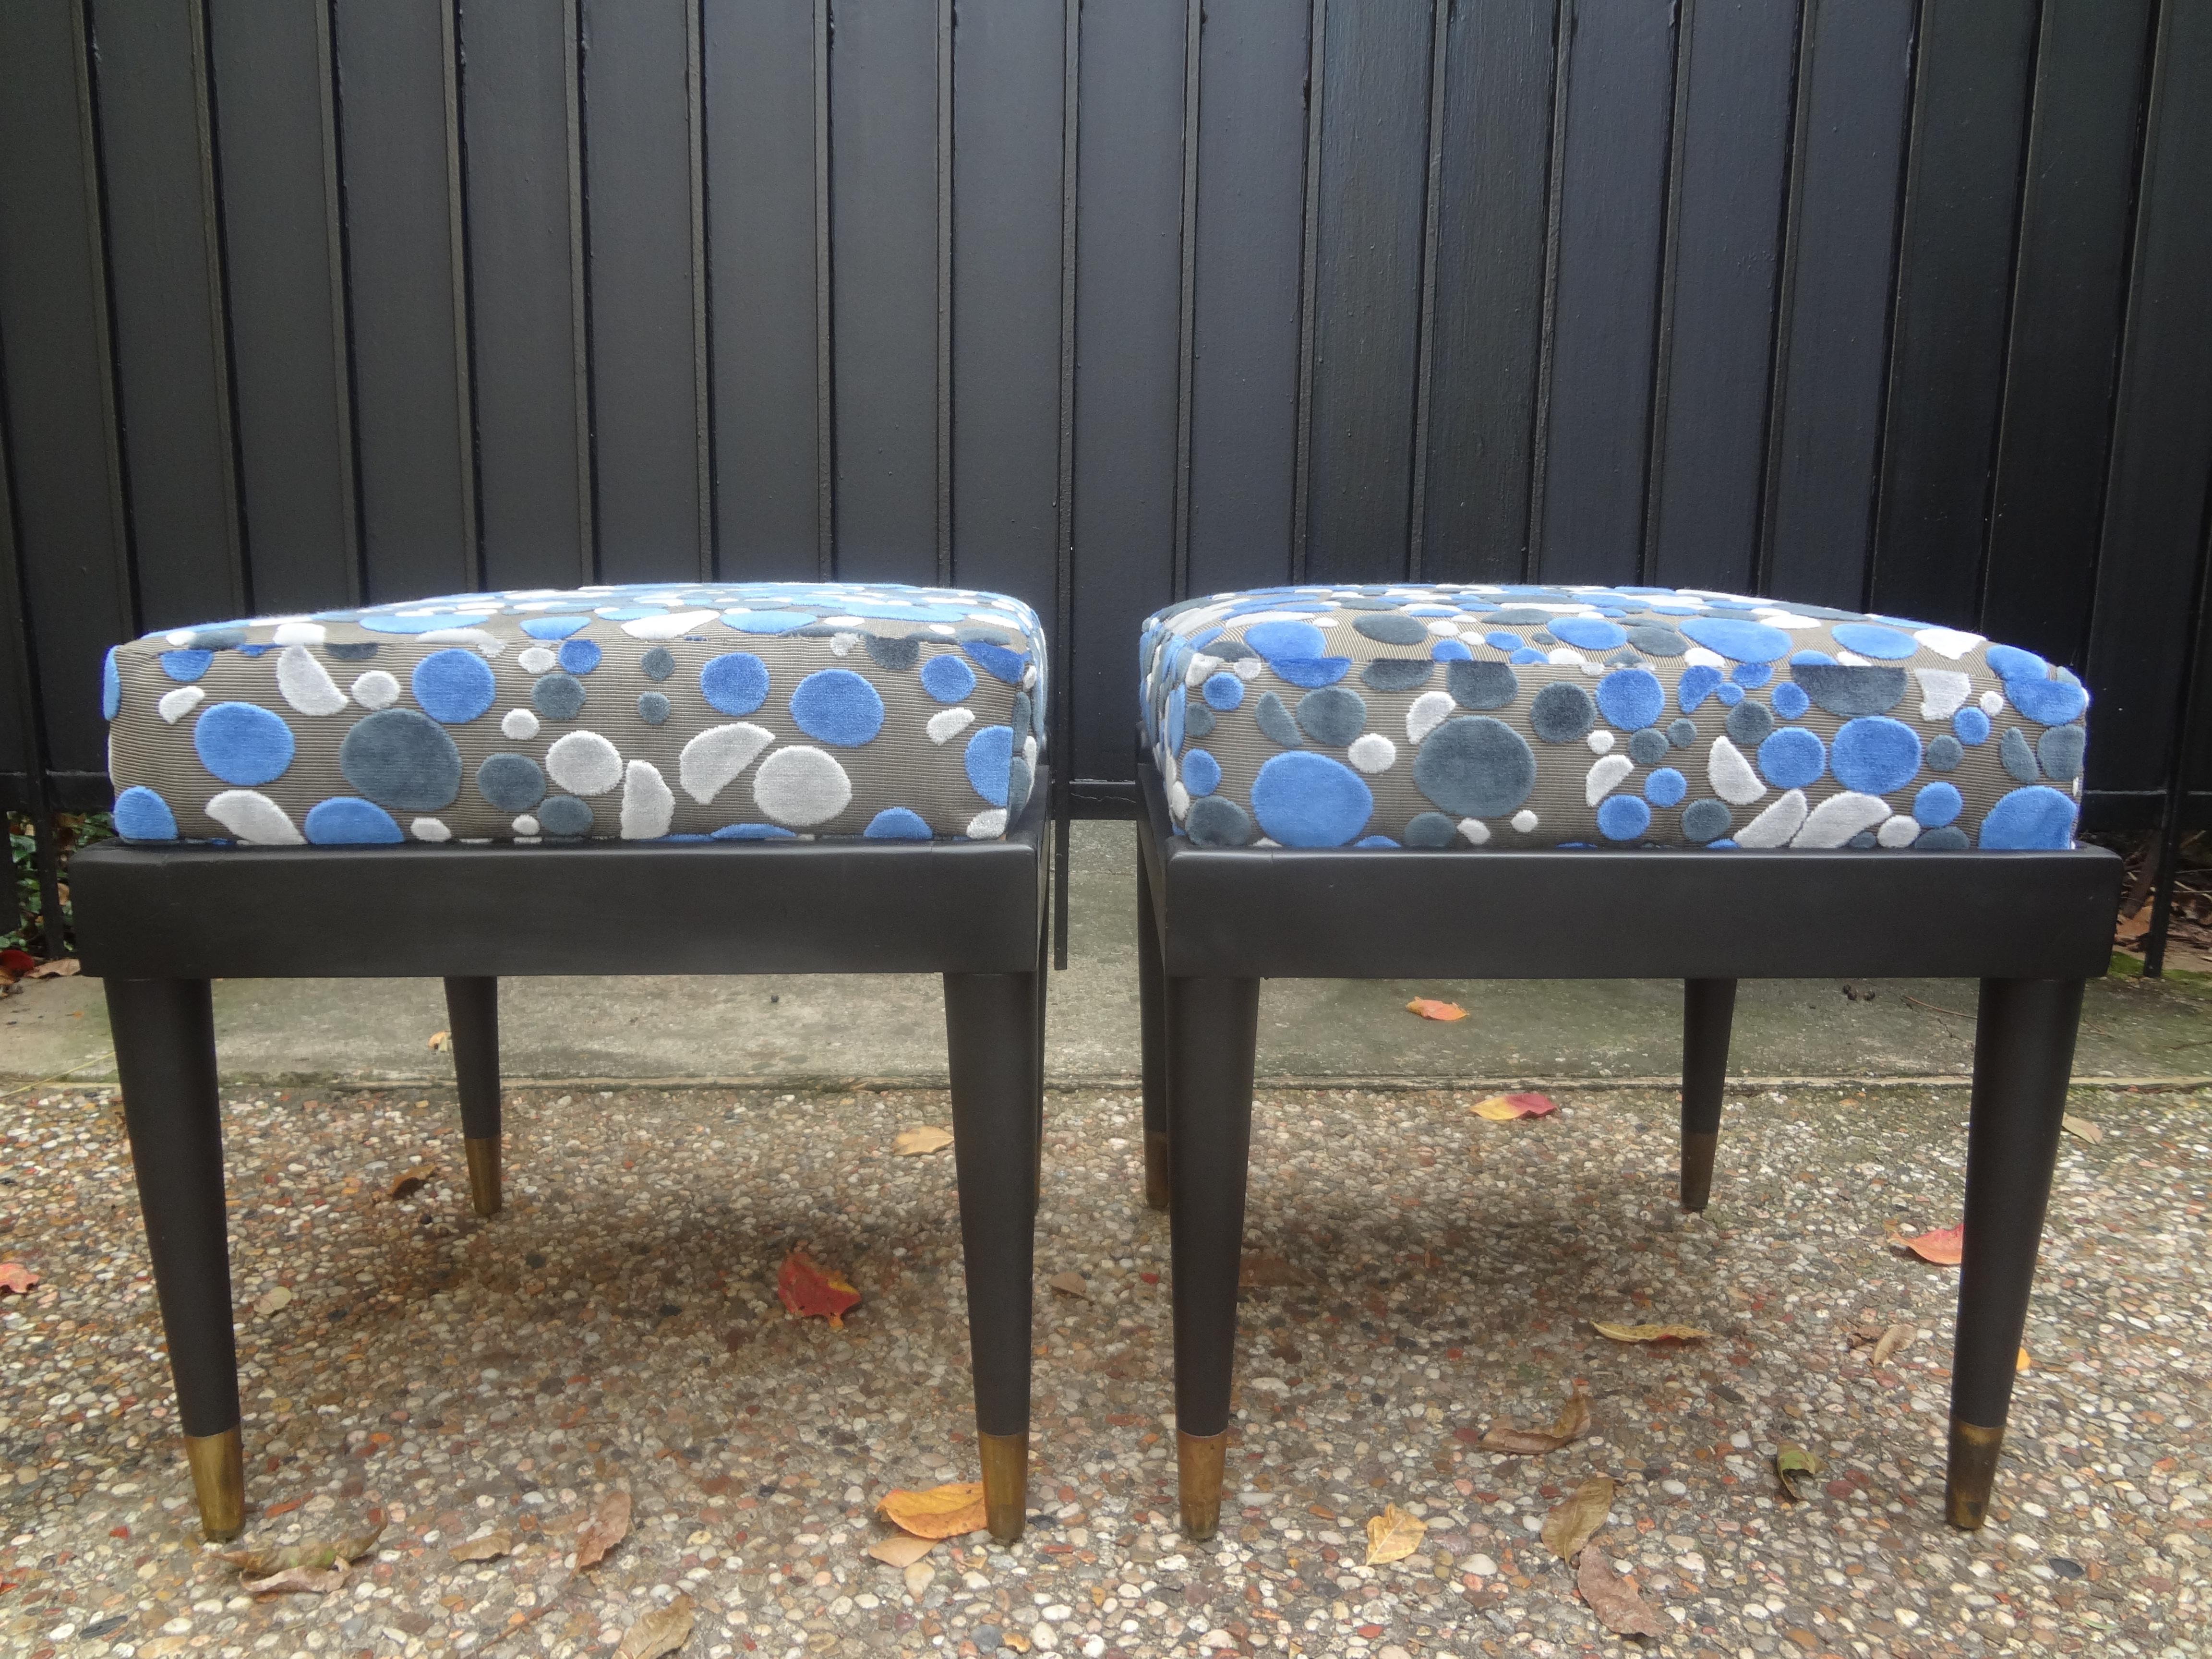 Pair of French Louis XVI style ottomans after Jansen. These stunning French Maison Jansen style ottomans, benches or stools have a matte ebonized finish, tapered legs with brass sabots. These French Mid-Century Modern benches have been newly